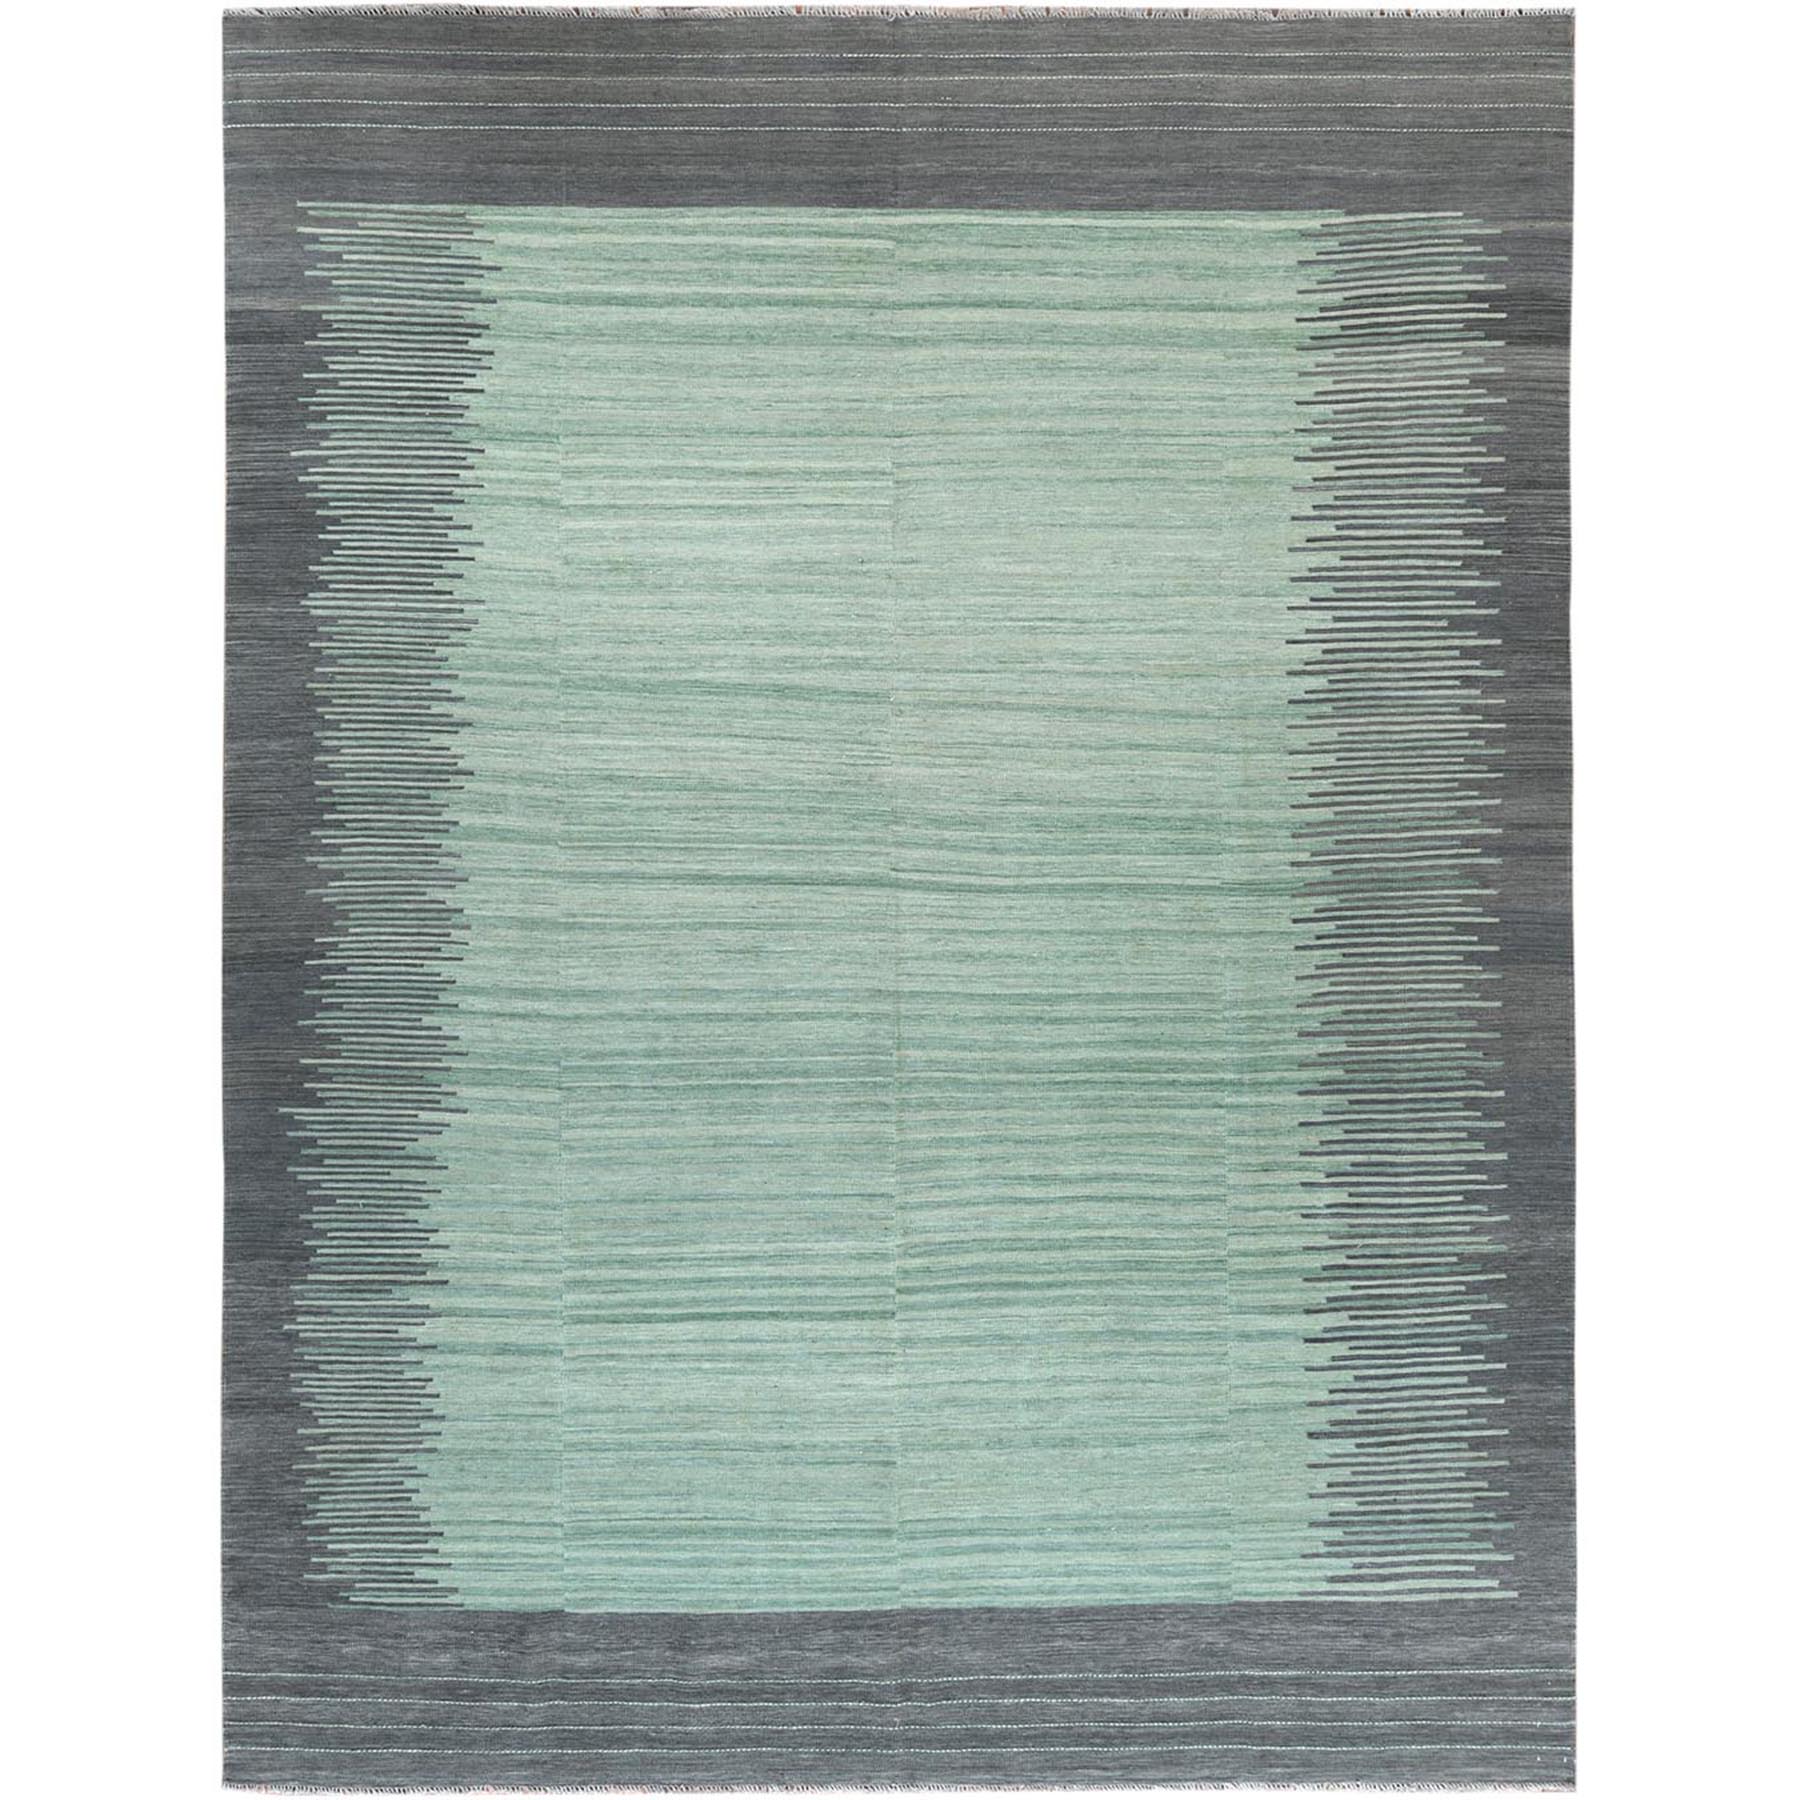 Modern & Contemporary Wool Hand-Woven Area Rug 9'2